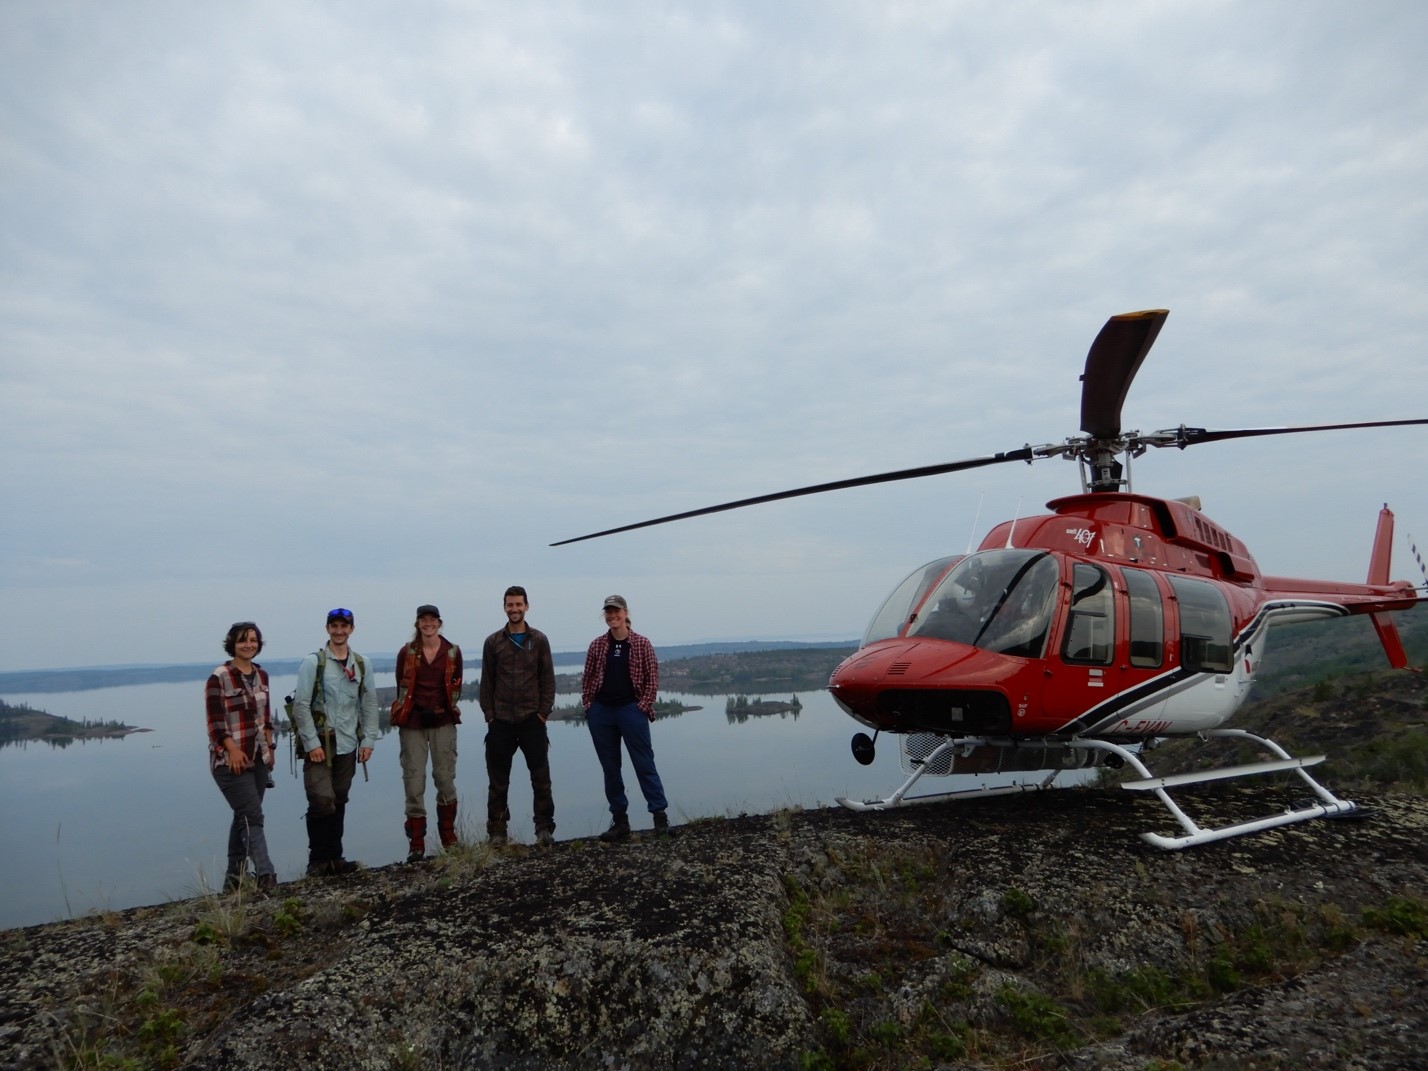 Five people and a helicopter.